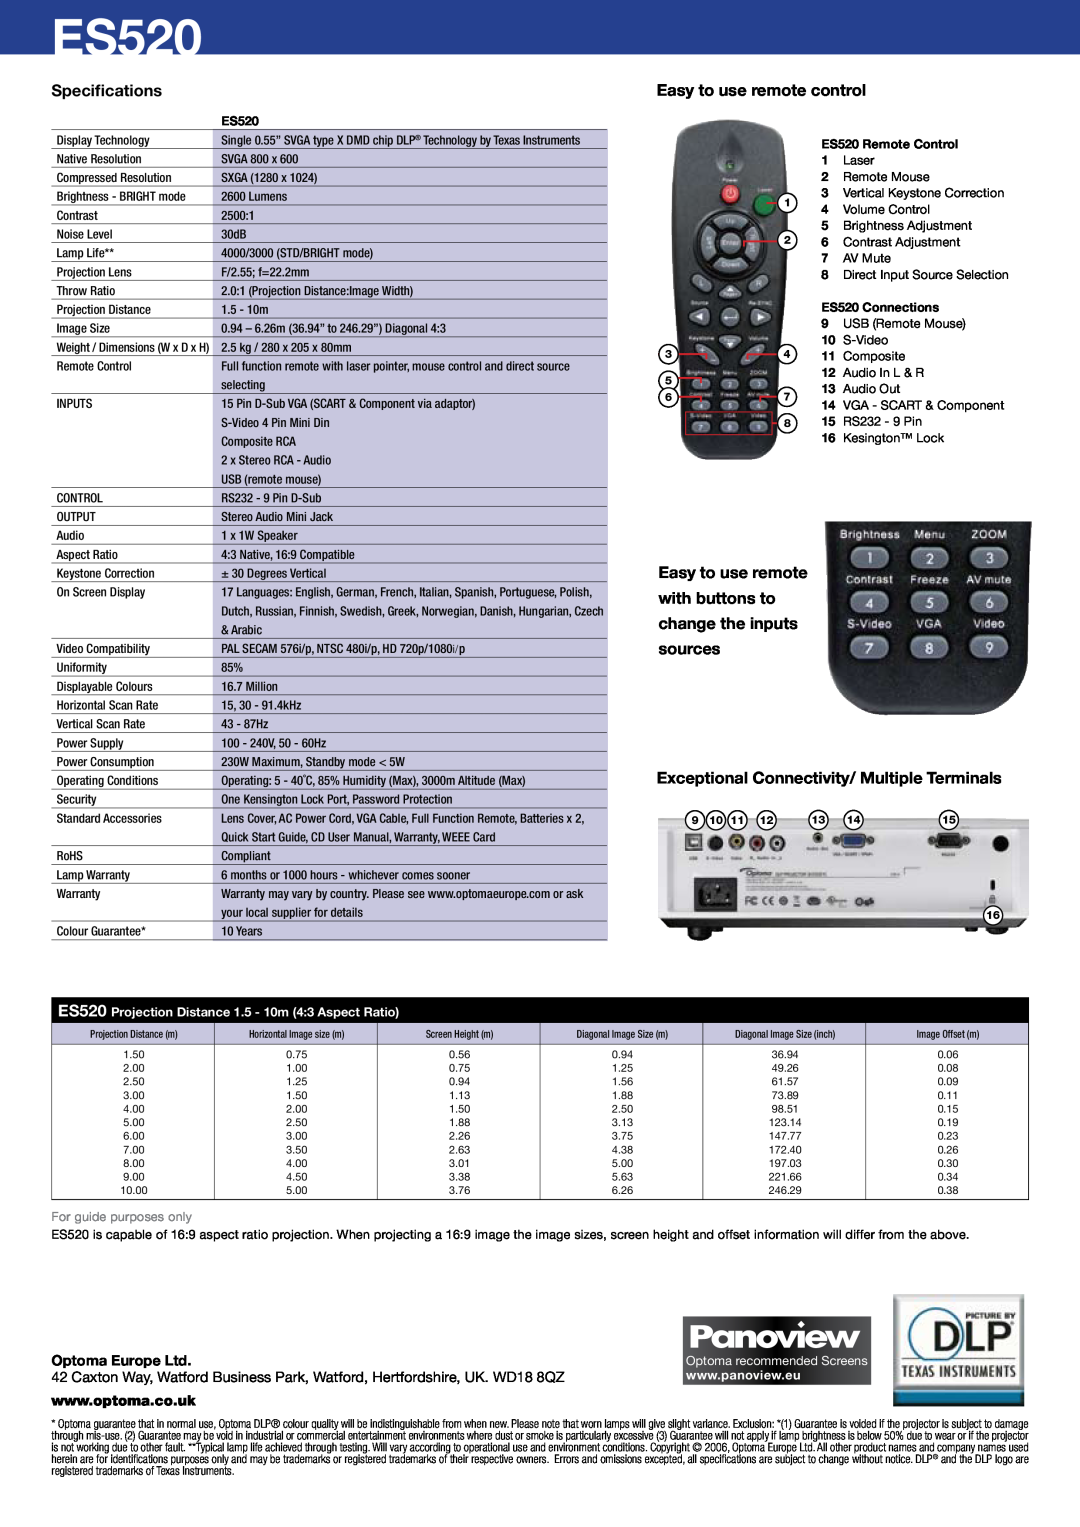 Optoma Technology ES520 manual Specifications, Easy to use remote control, Exceptional Connectivity/ Multiple Terminals 